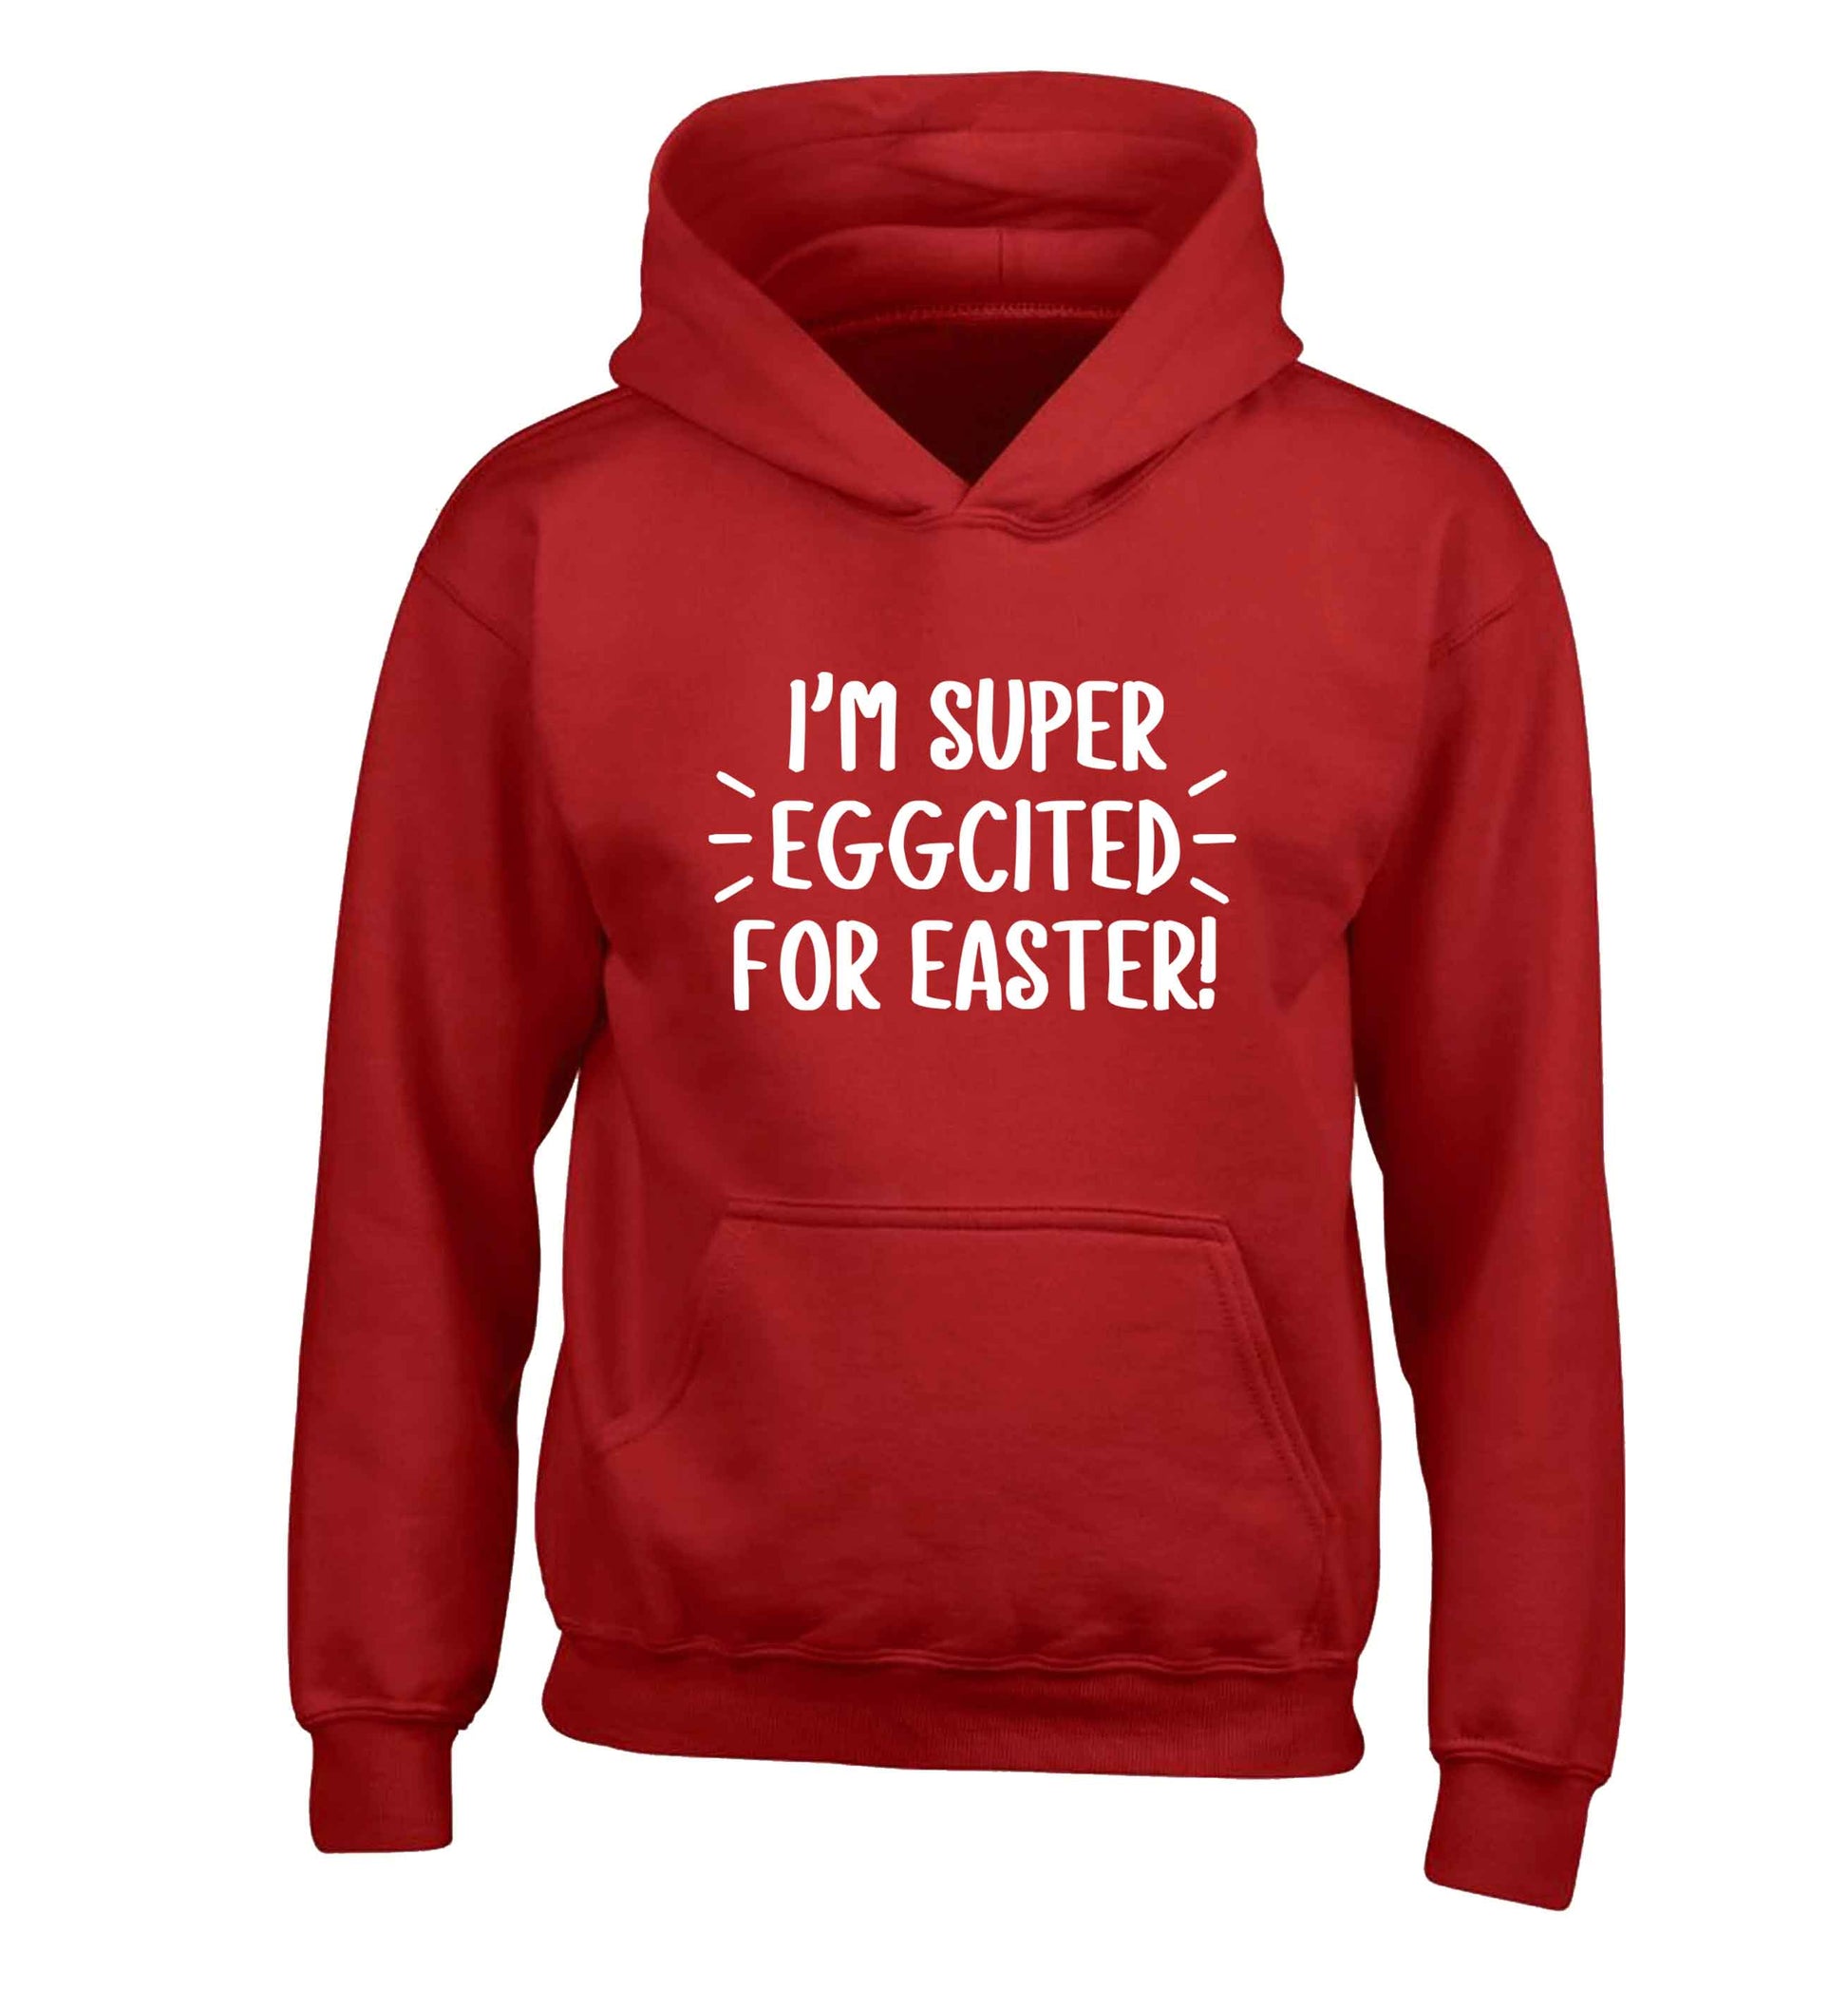 I'm super eggcited for Easter children's red hoodie 12-13 Years